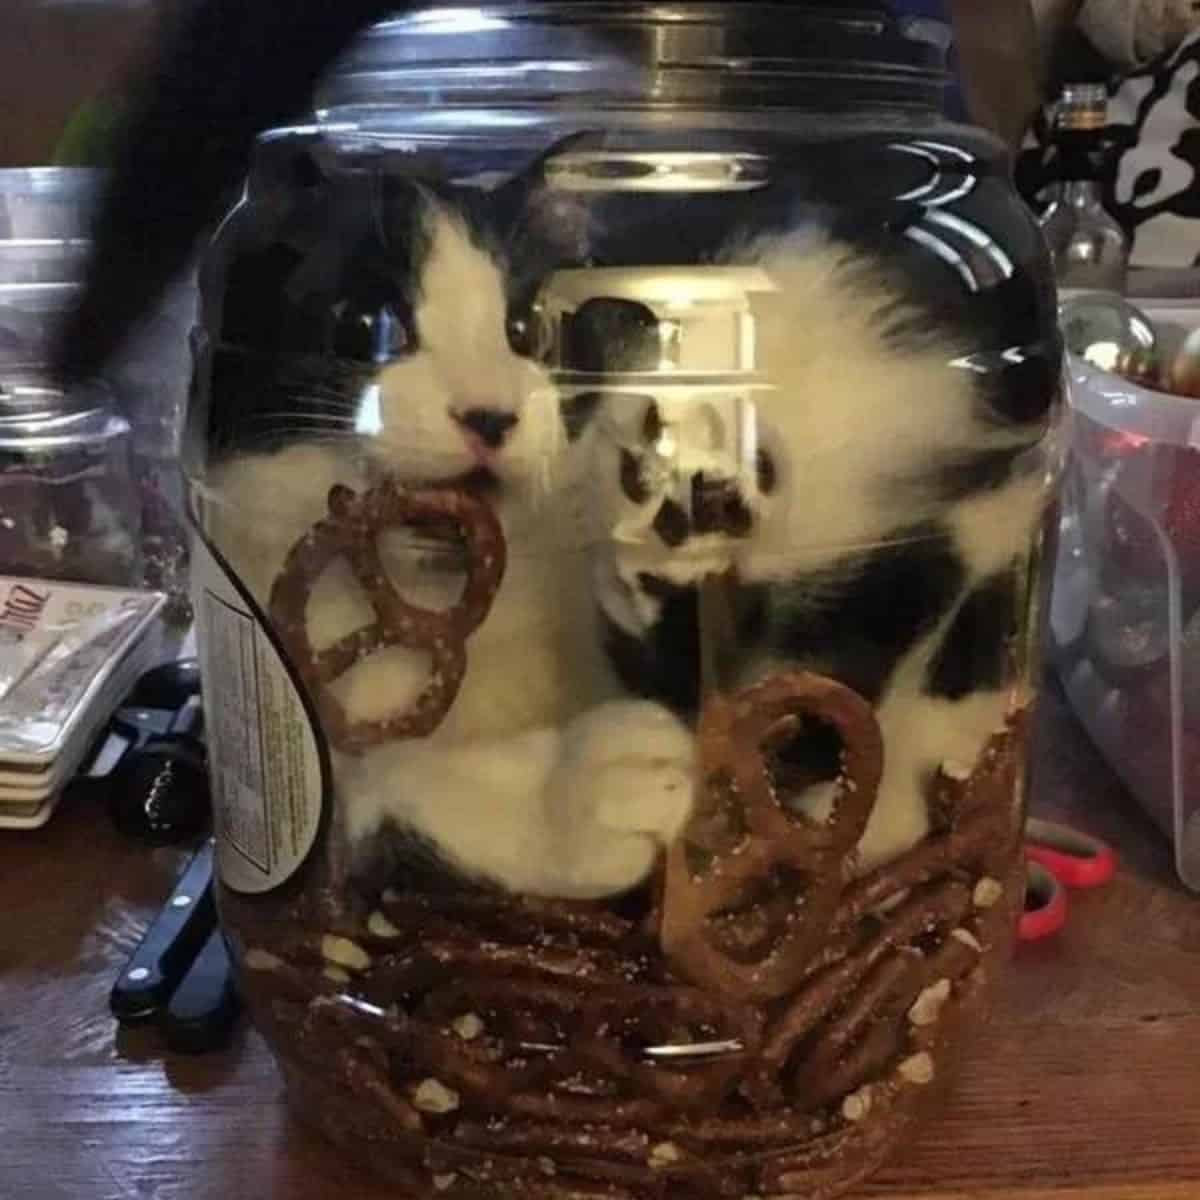 black and white cat in a glass dish